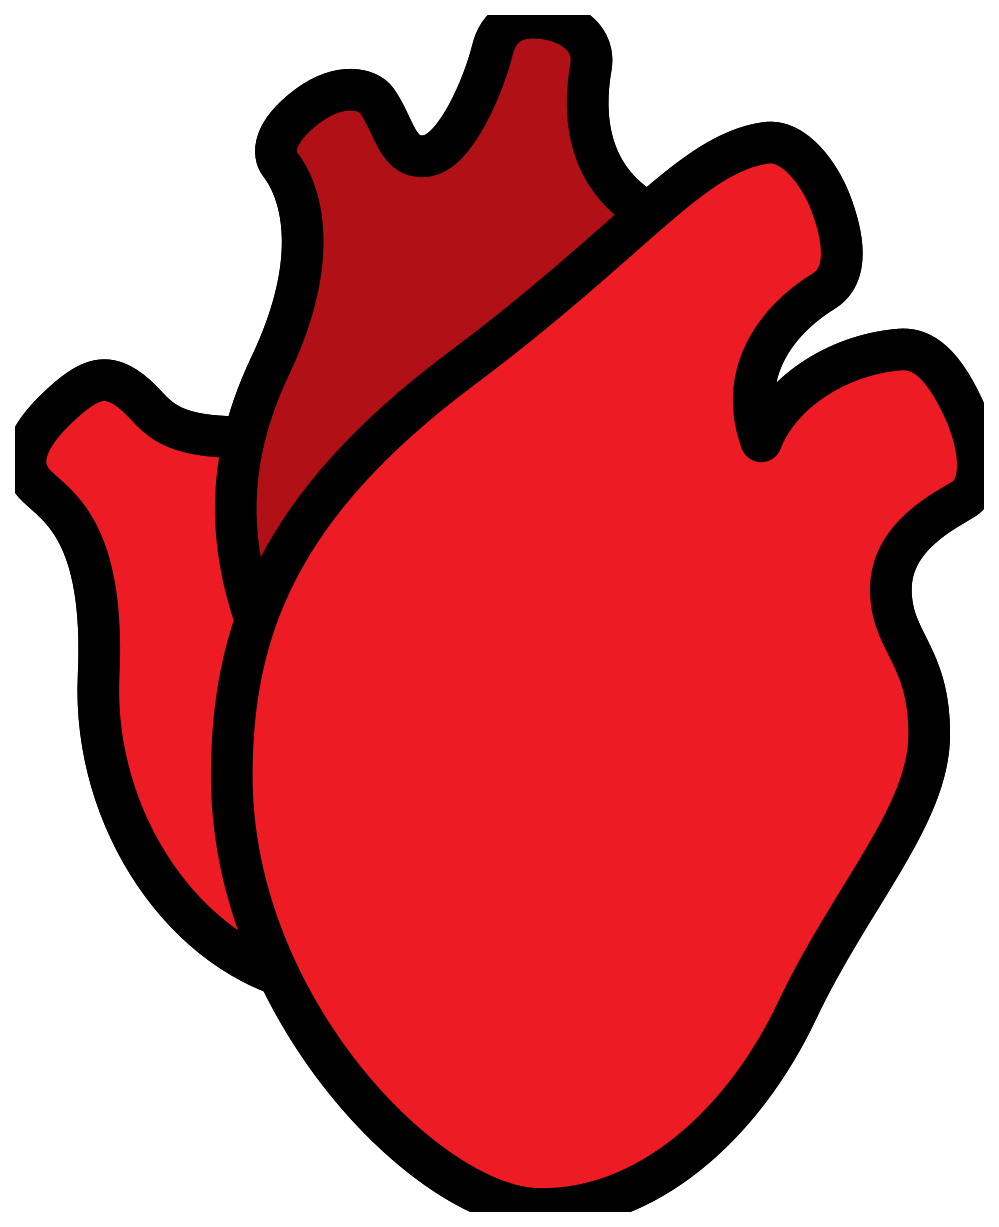 Red Human Heart Free PNG Image